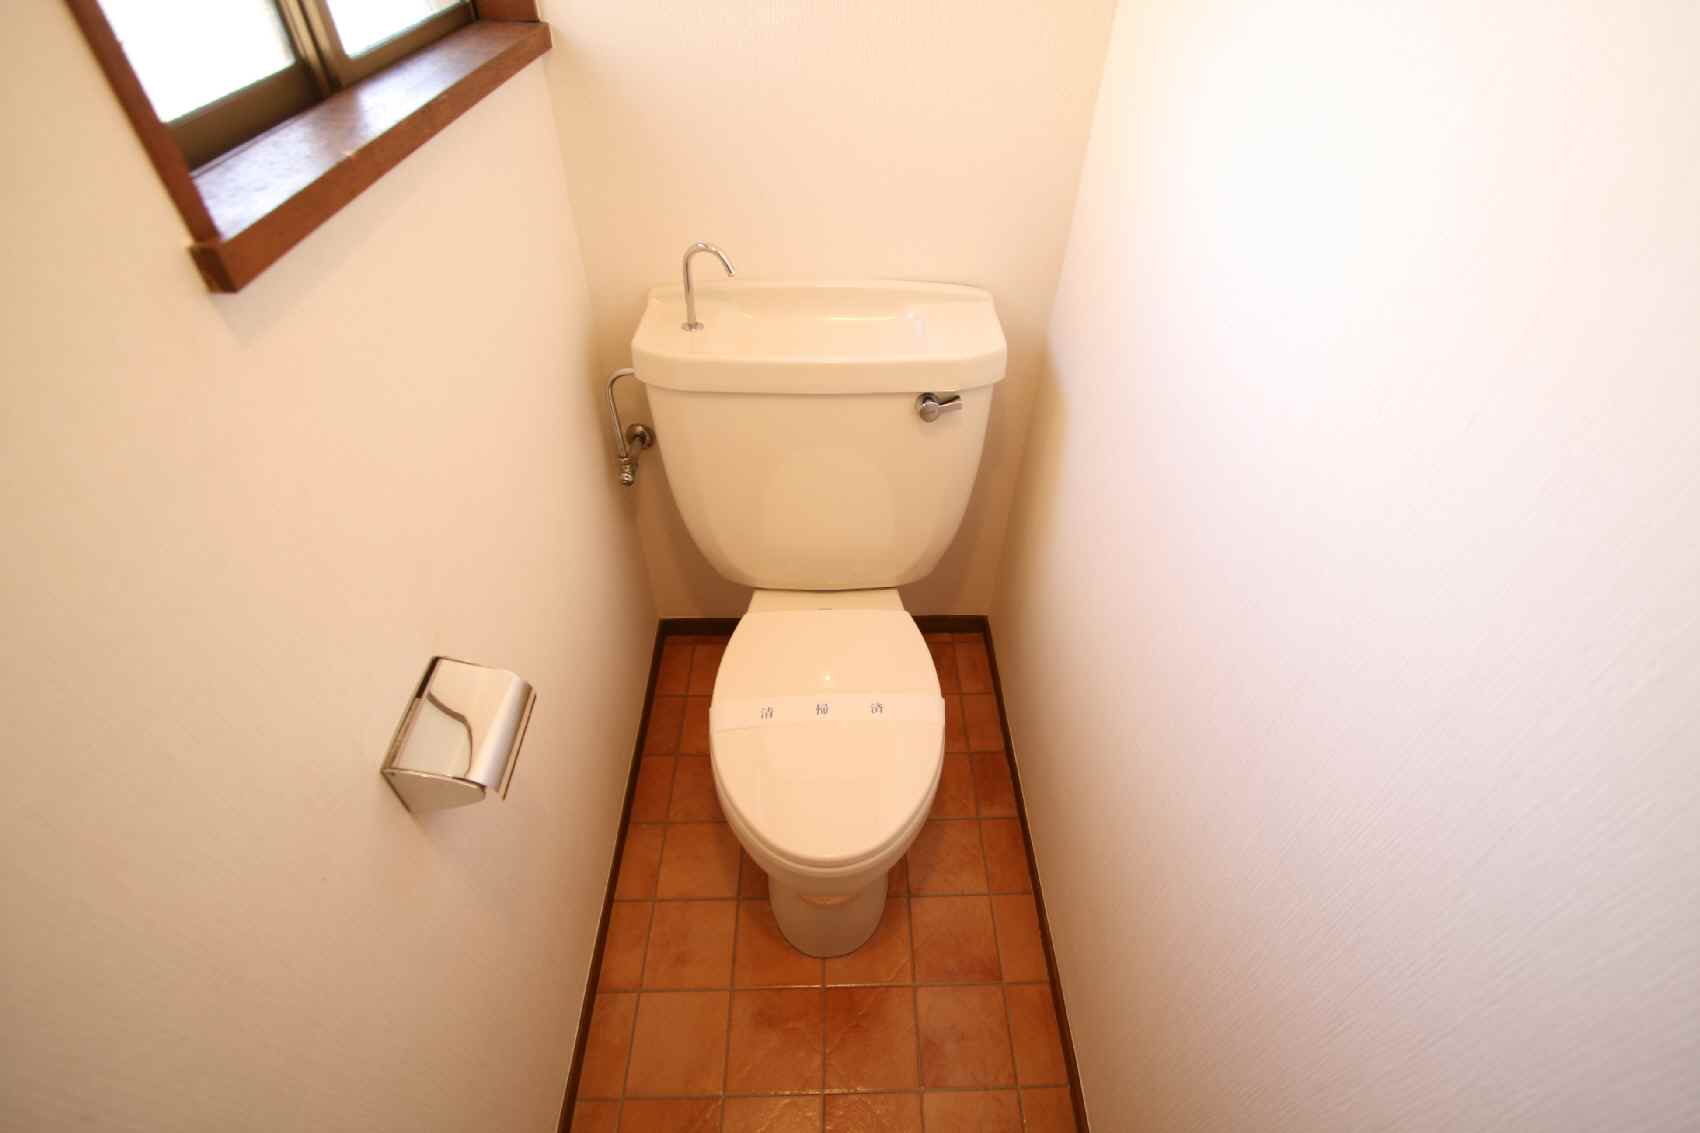 Toilet. There the first floor second floor.